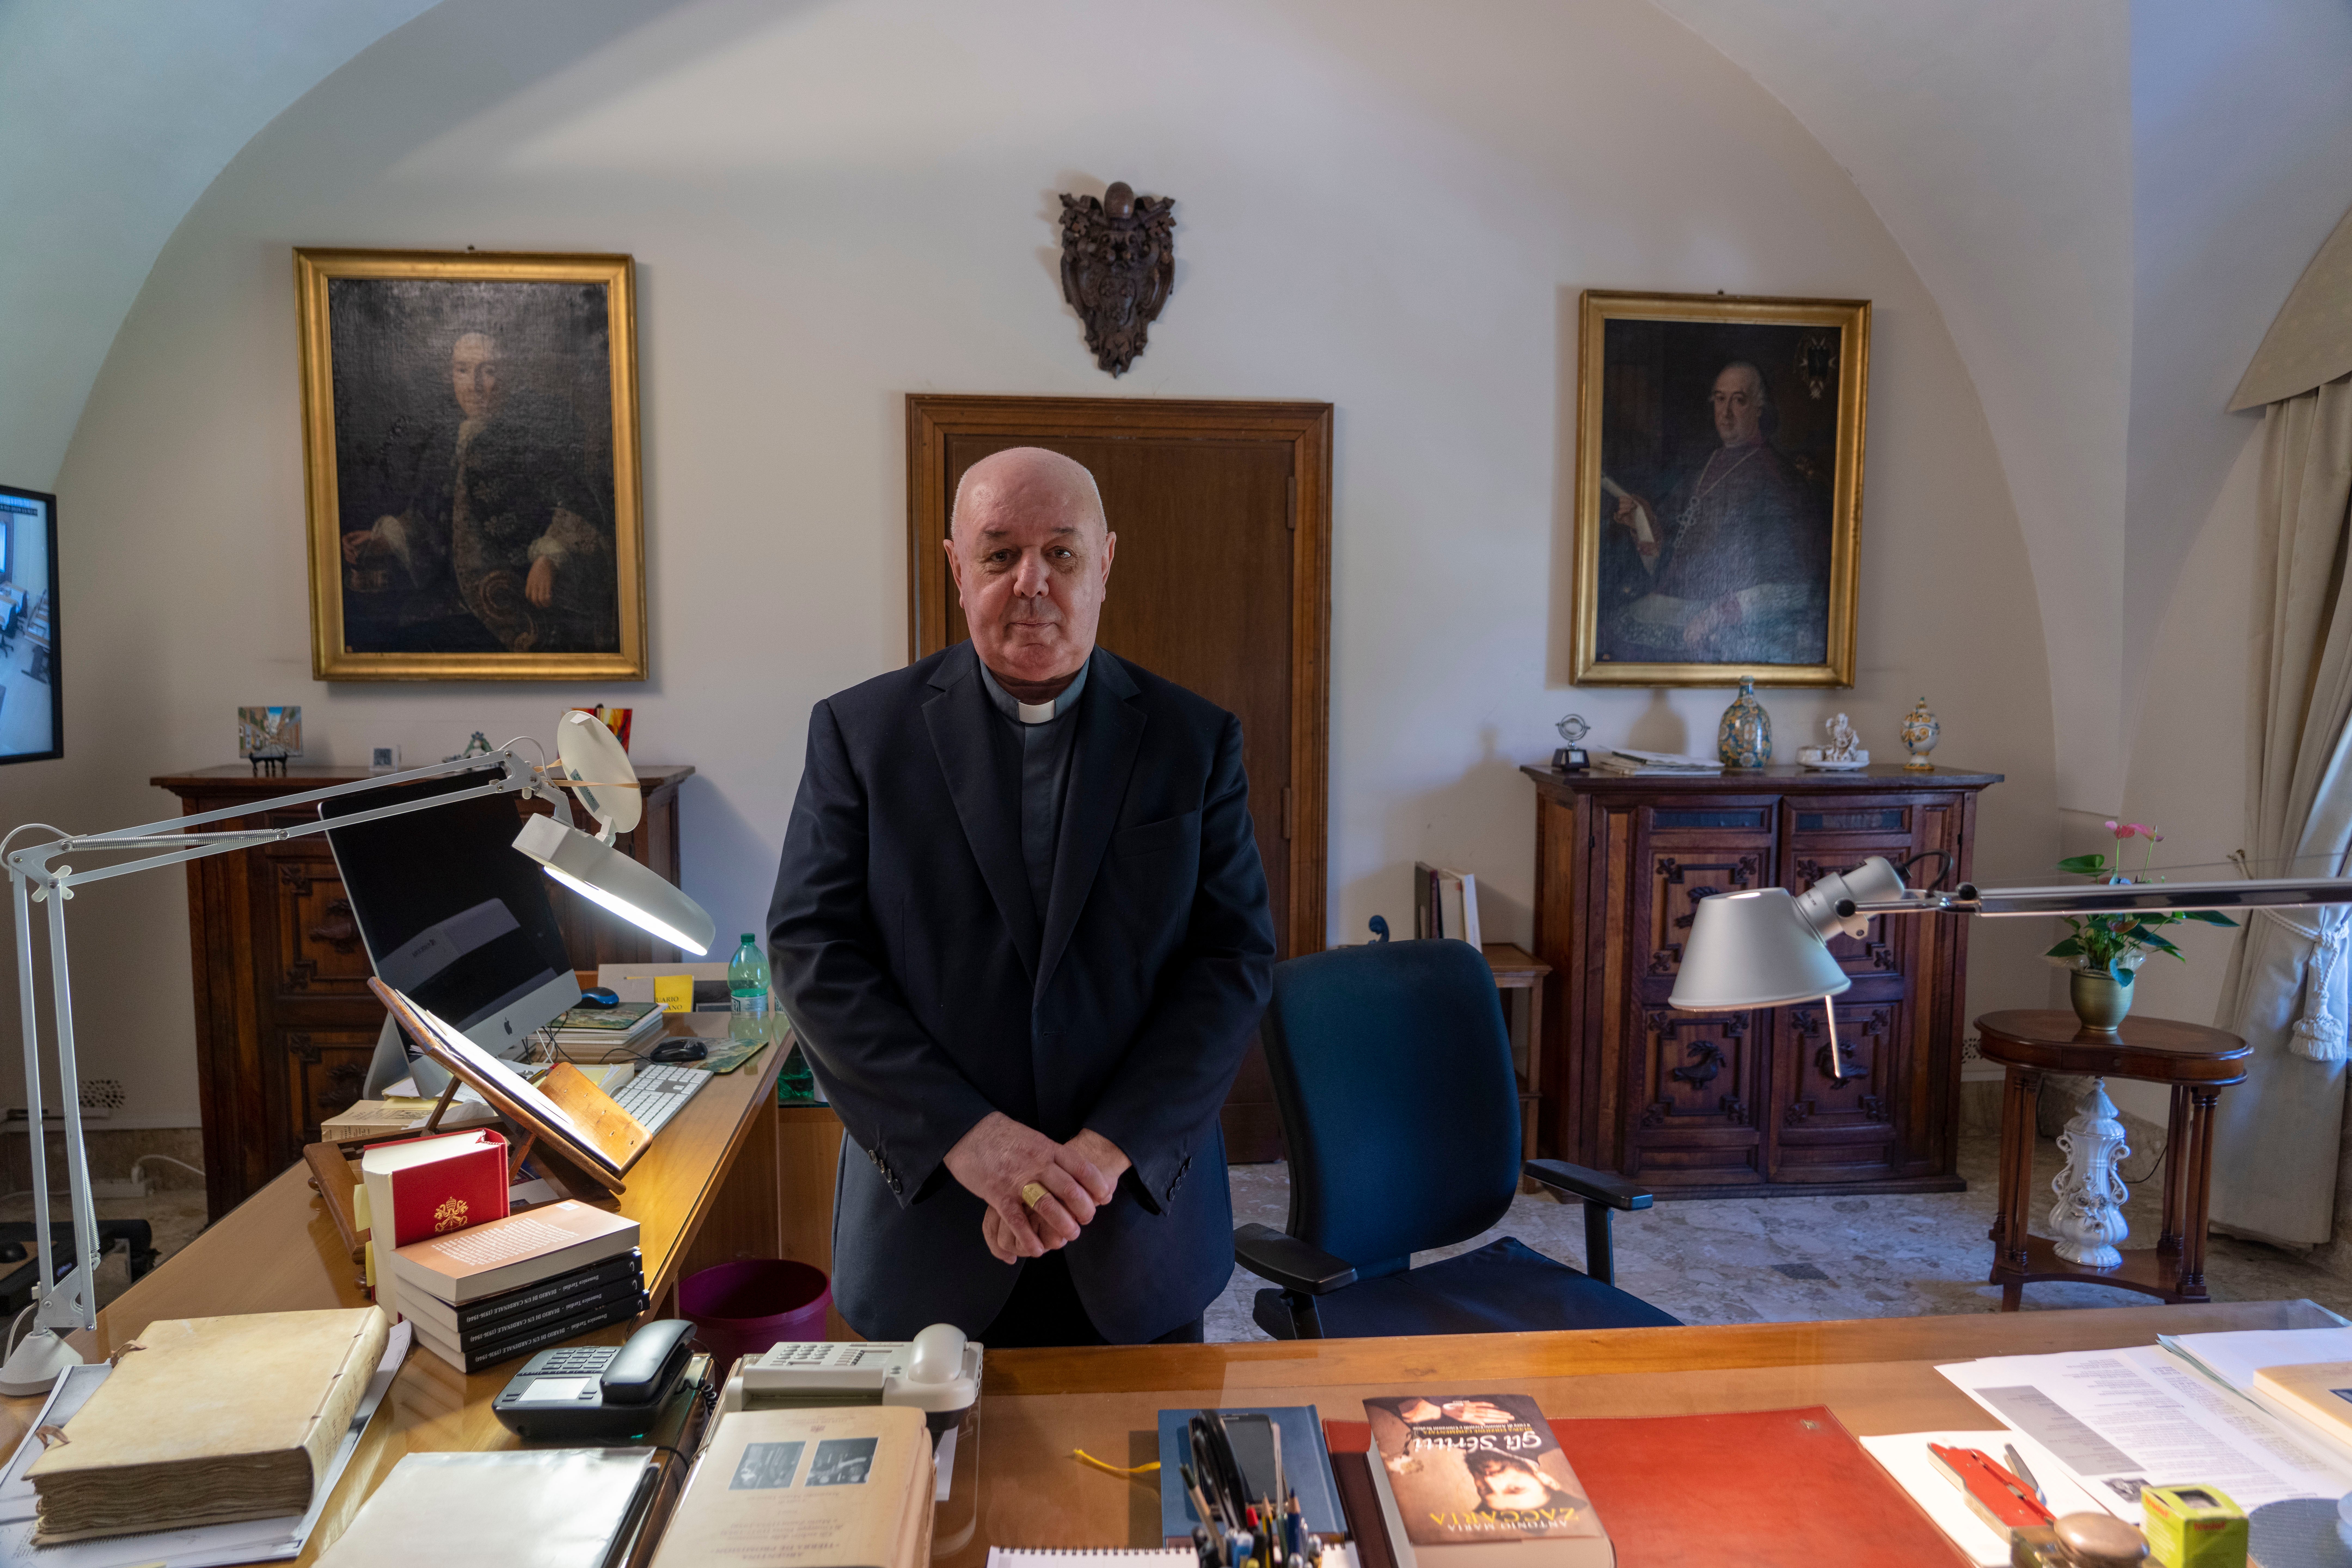 Pagano, who will retire later this year, poses in his office at the Vatican